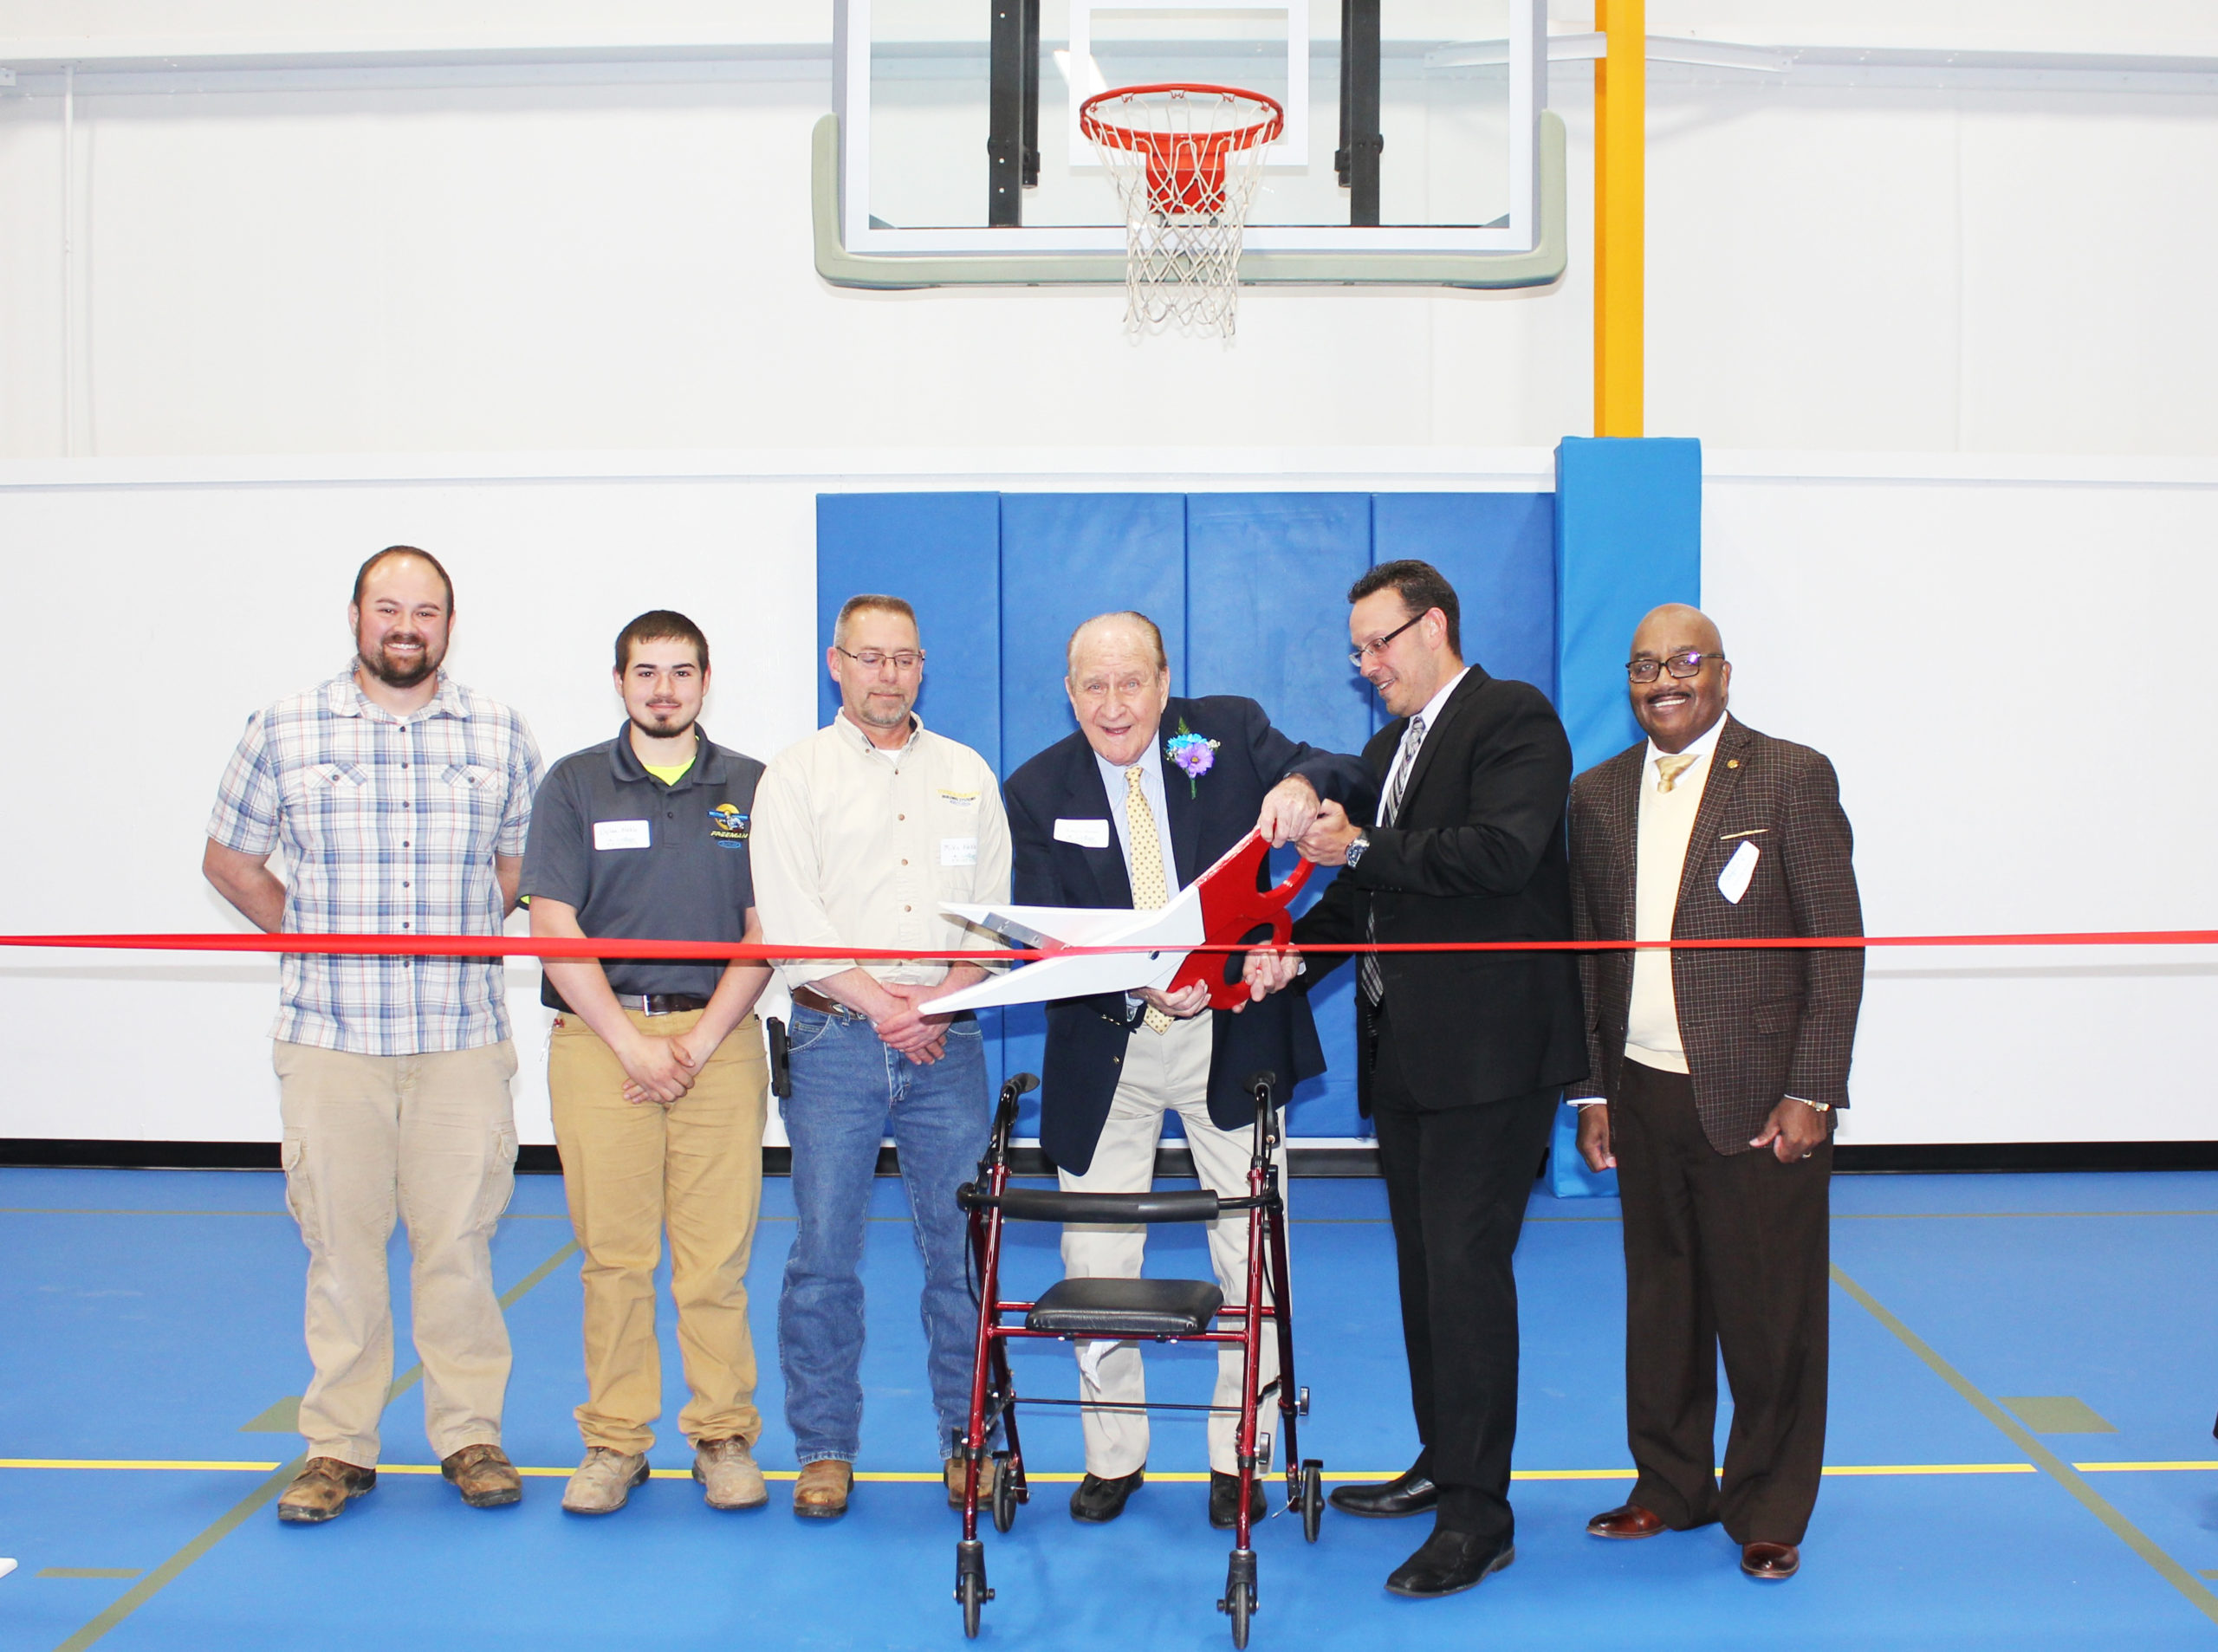 The Village Network Honors Long Time Employee at Ribbon Cutting for the Robert J. Maruna Field House